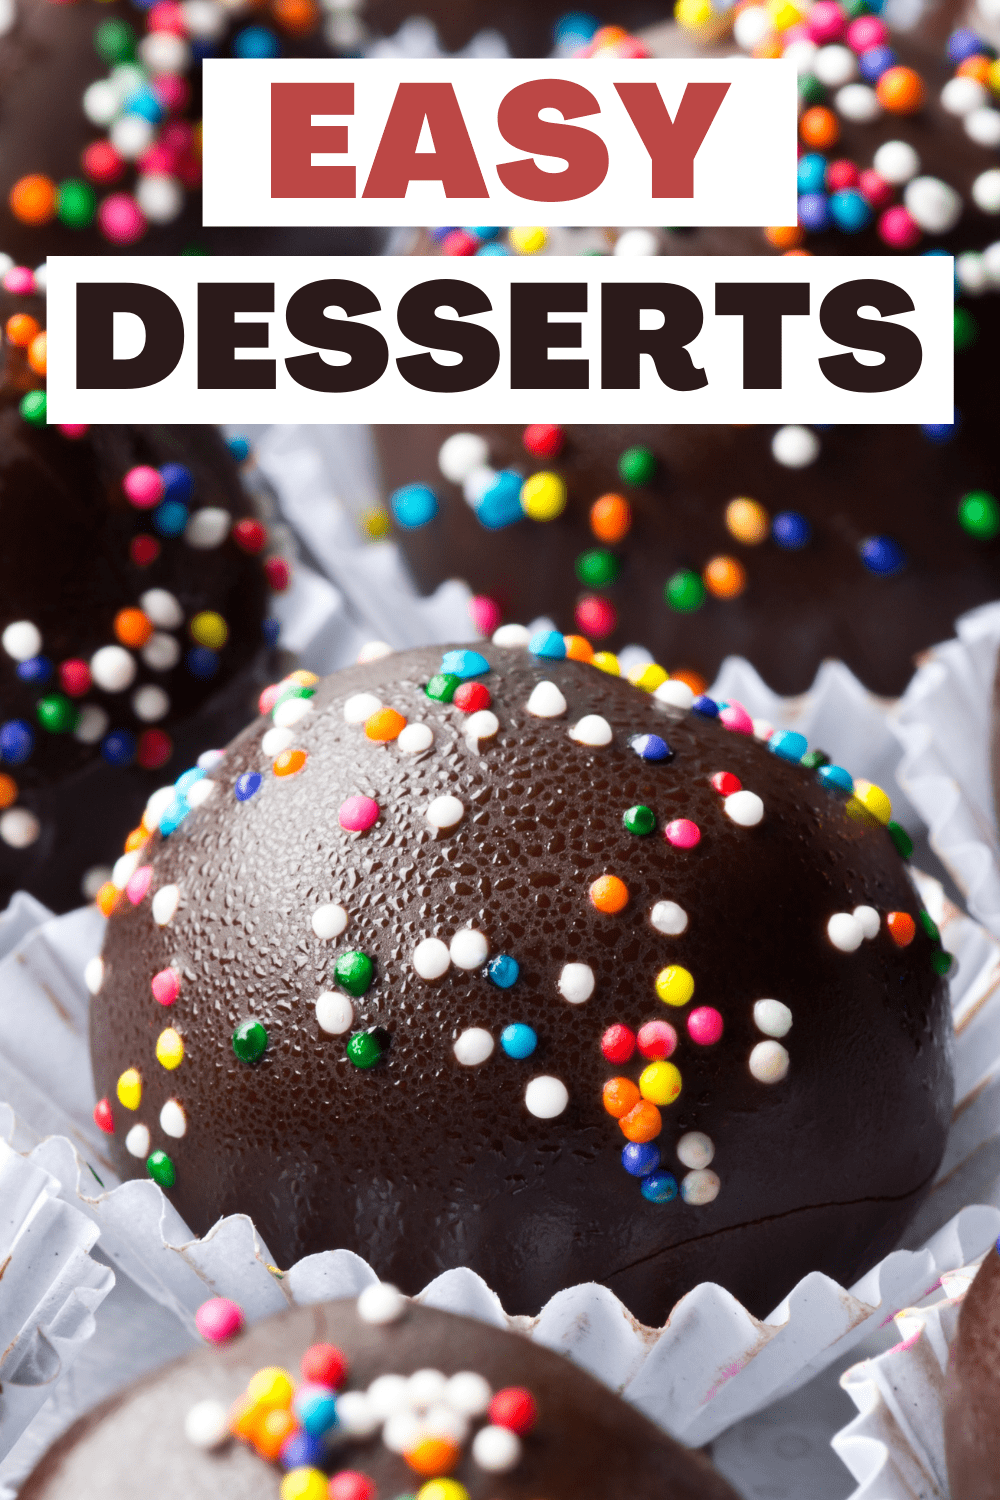 32 Easy Desserts To Make at Home - Insanely Good